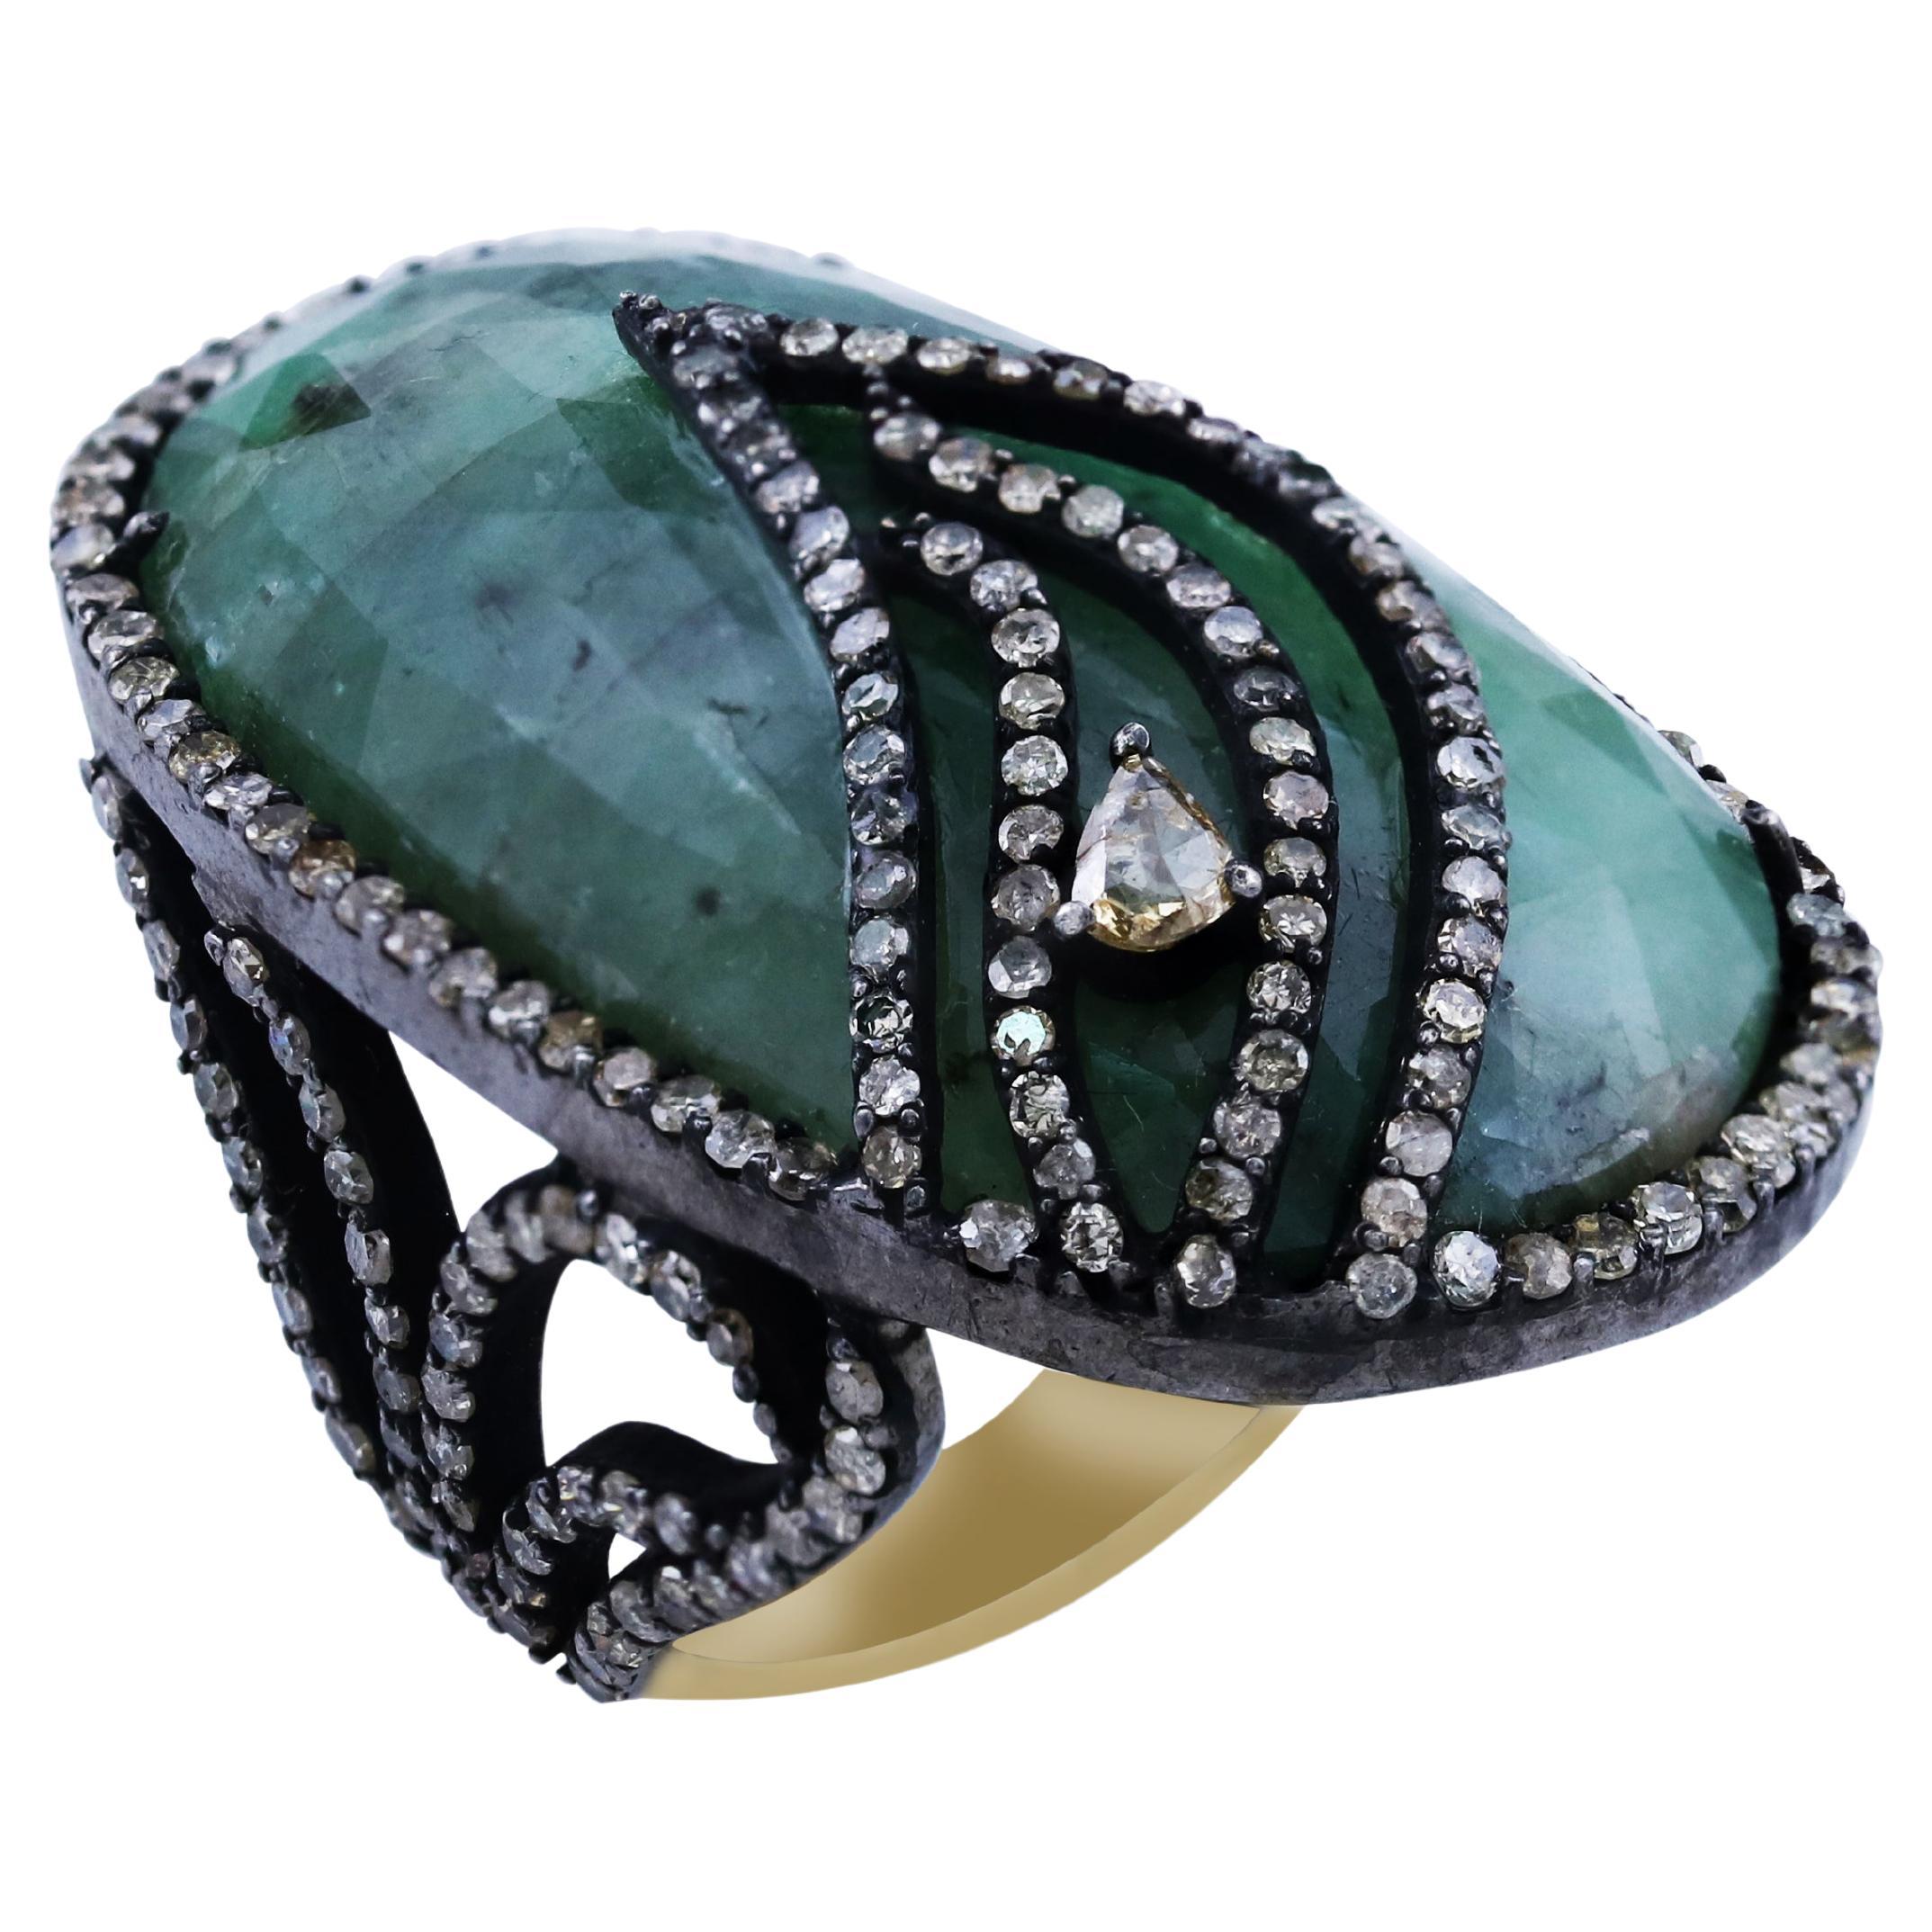 Gemistry Victorian 51.11cttw Diamond and Emerald Open Work Ring For Sale